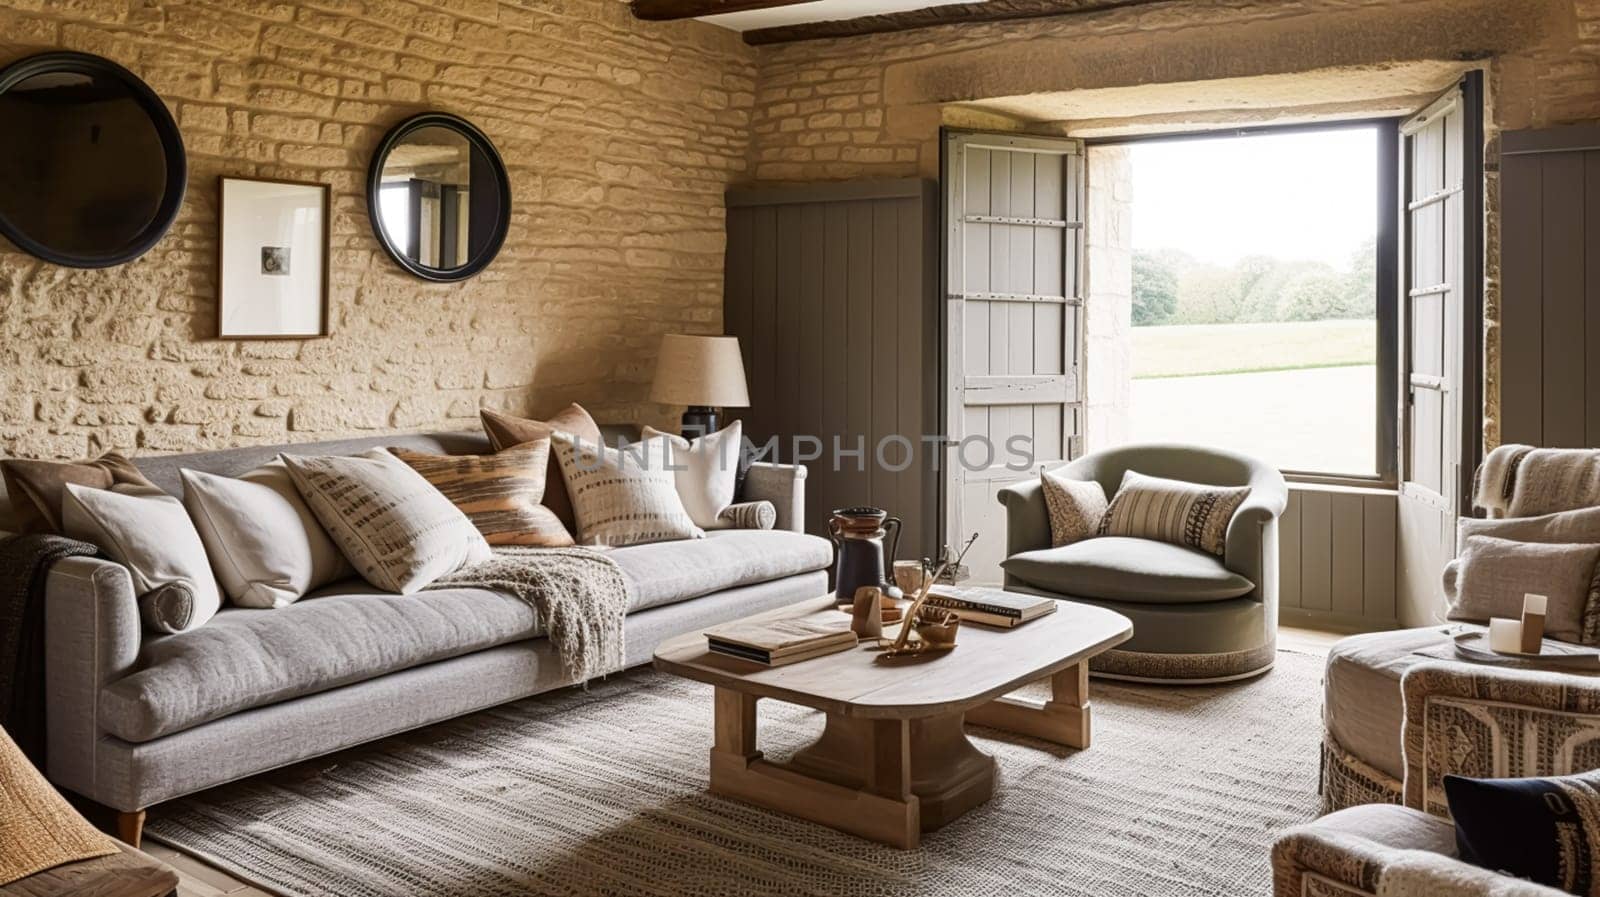 Cottage living room decor, sitting room and interior design, antique furniture, sofa and home decor in English country house and elegant farmhouse style idea